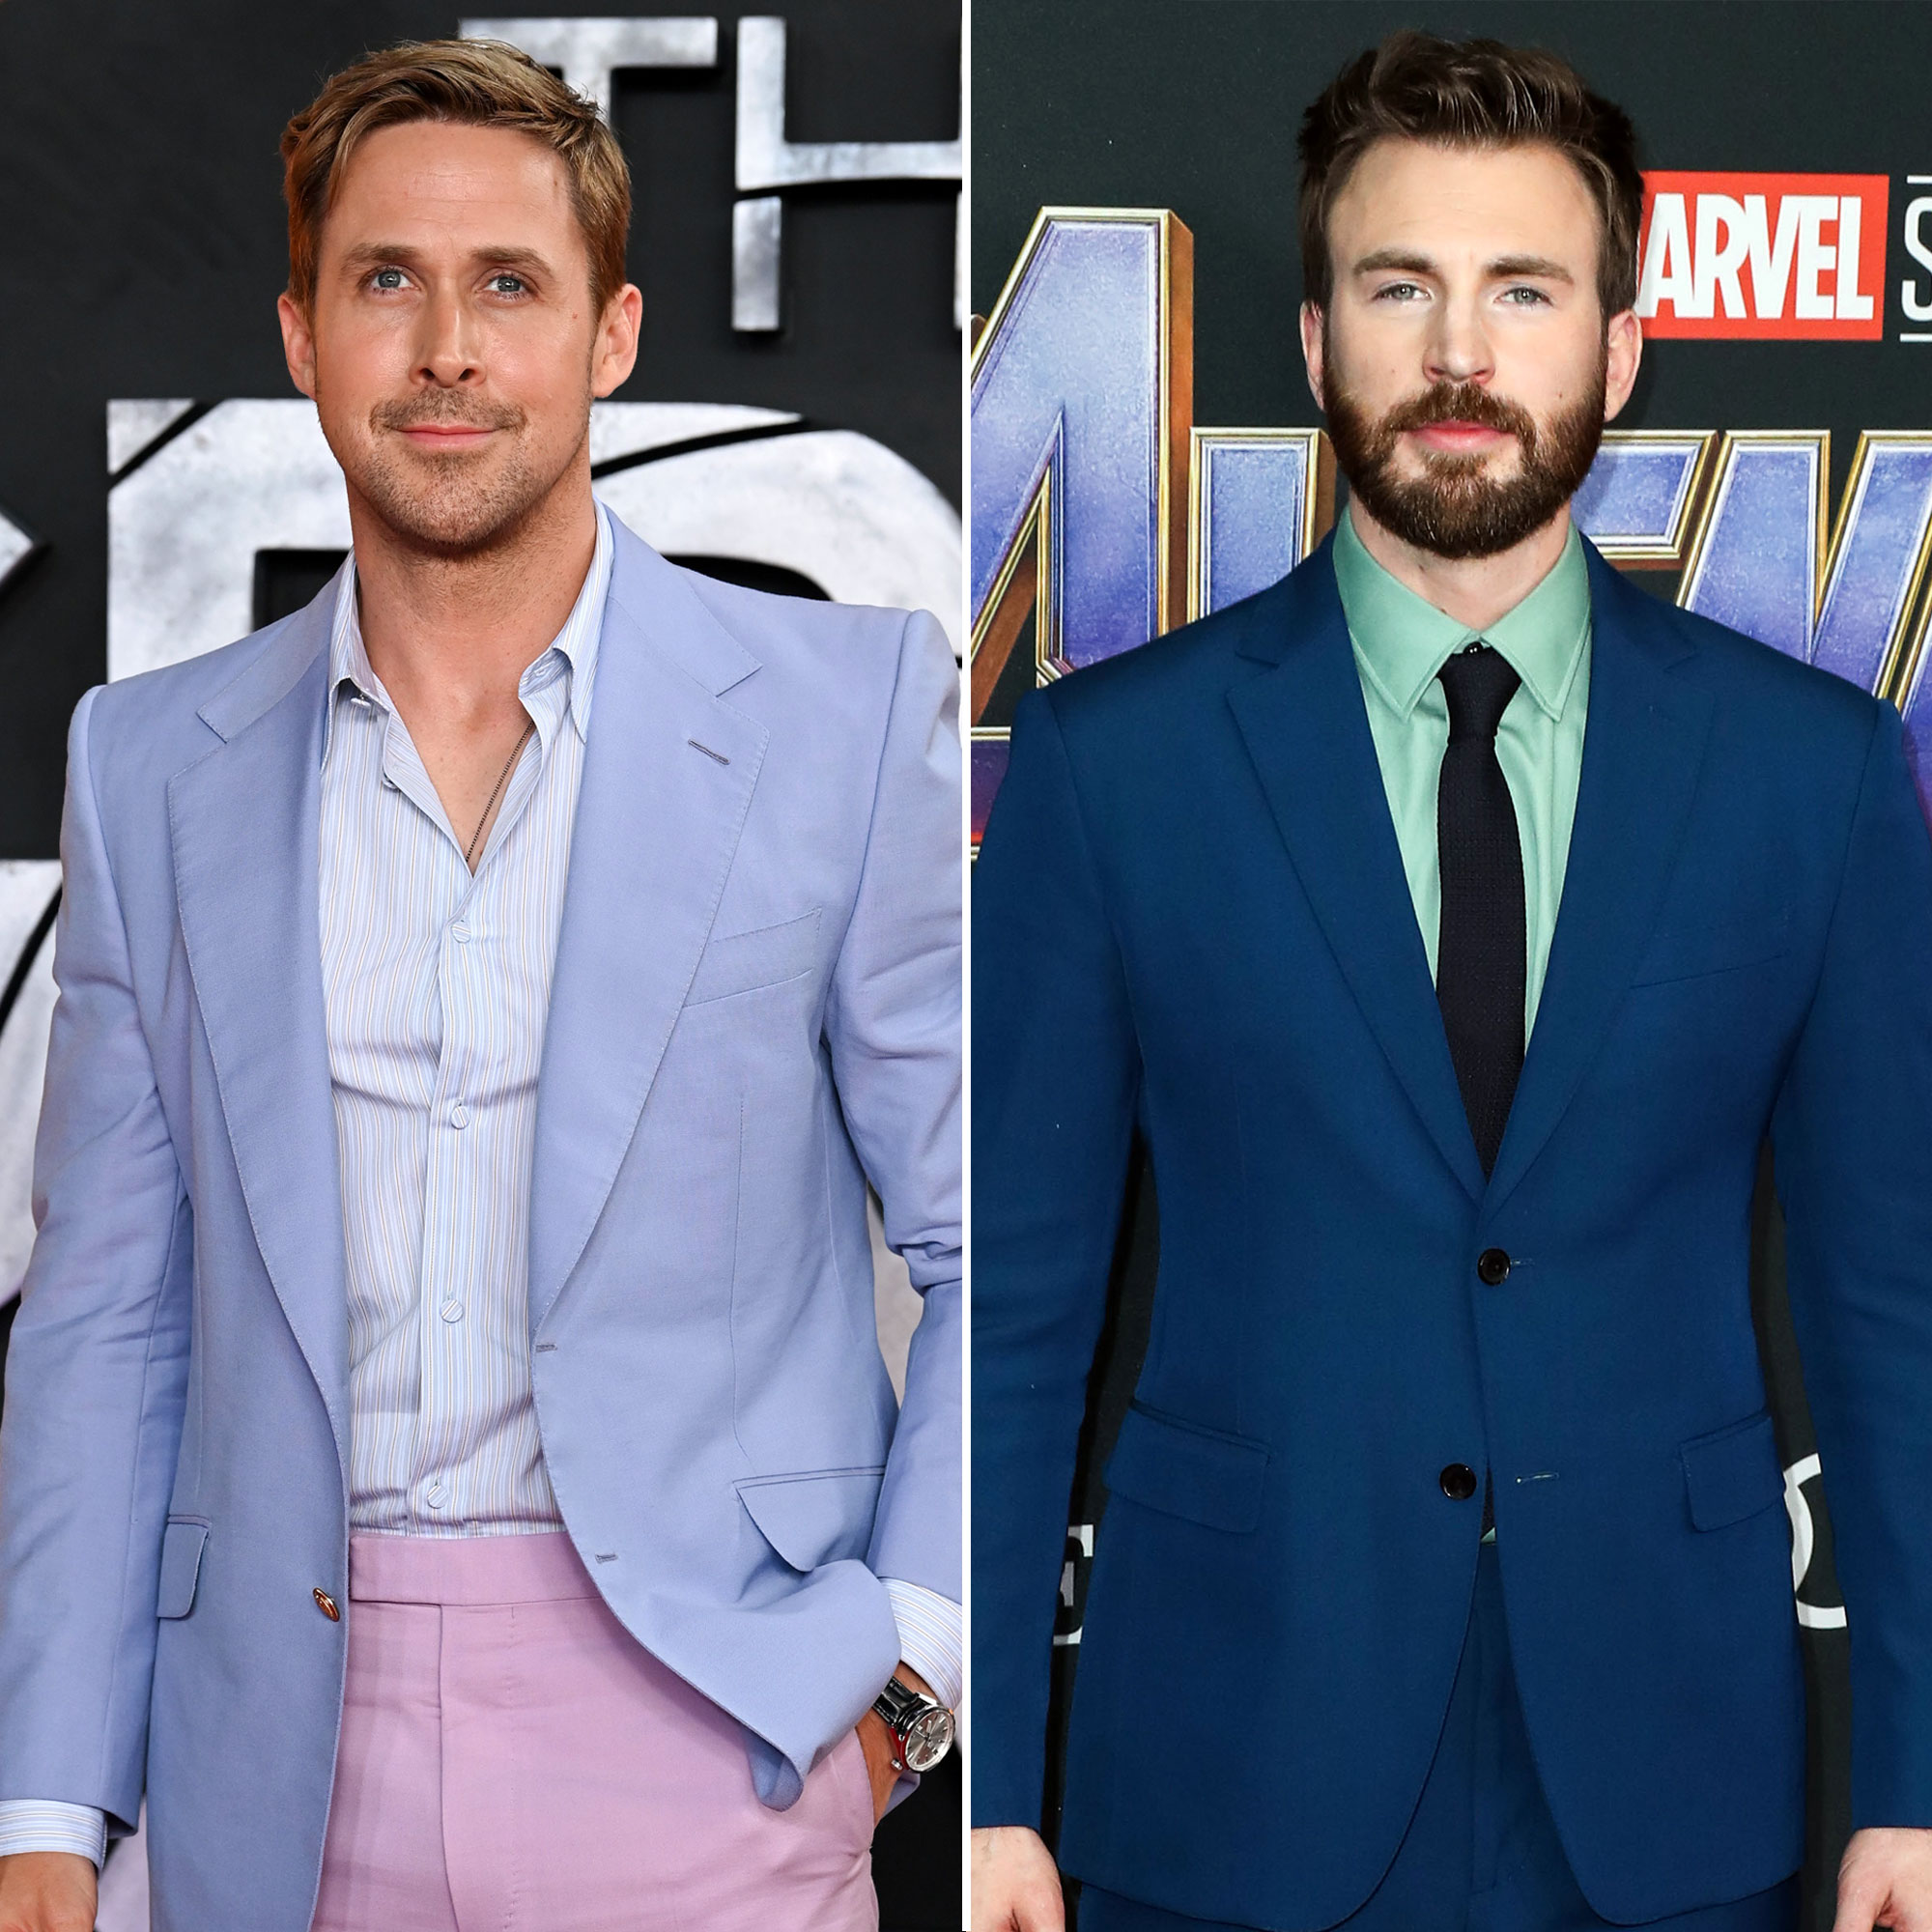 Ryan Gosling, Chris Evans & More at 'The Gray Man' Premiere Red